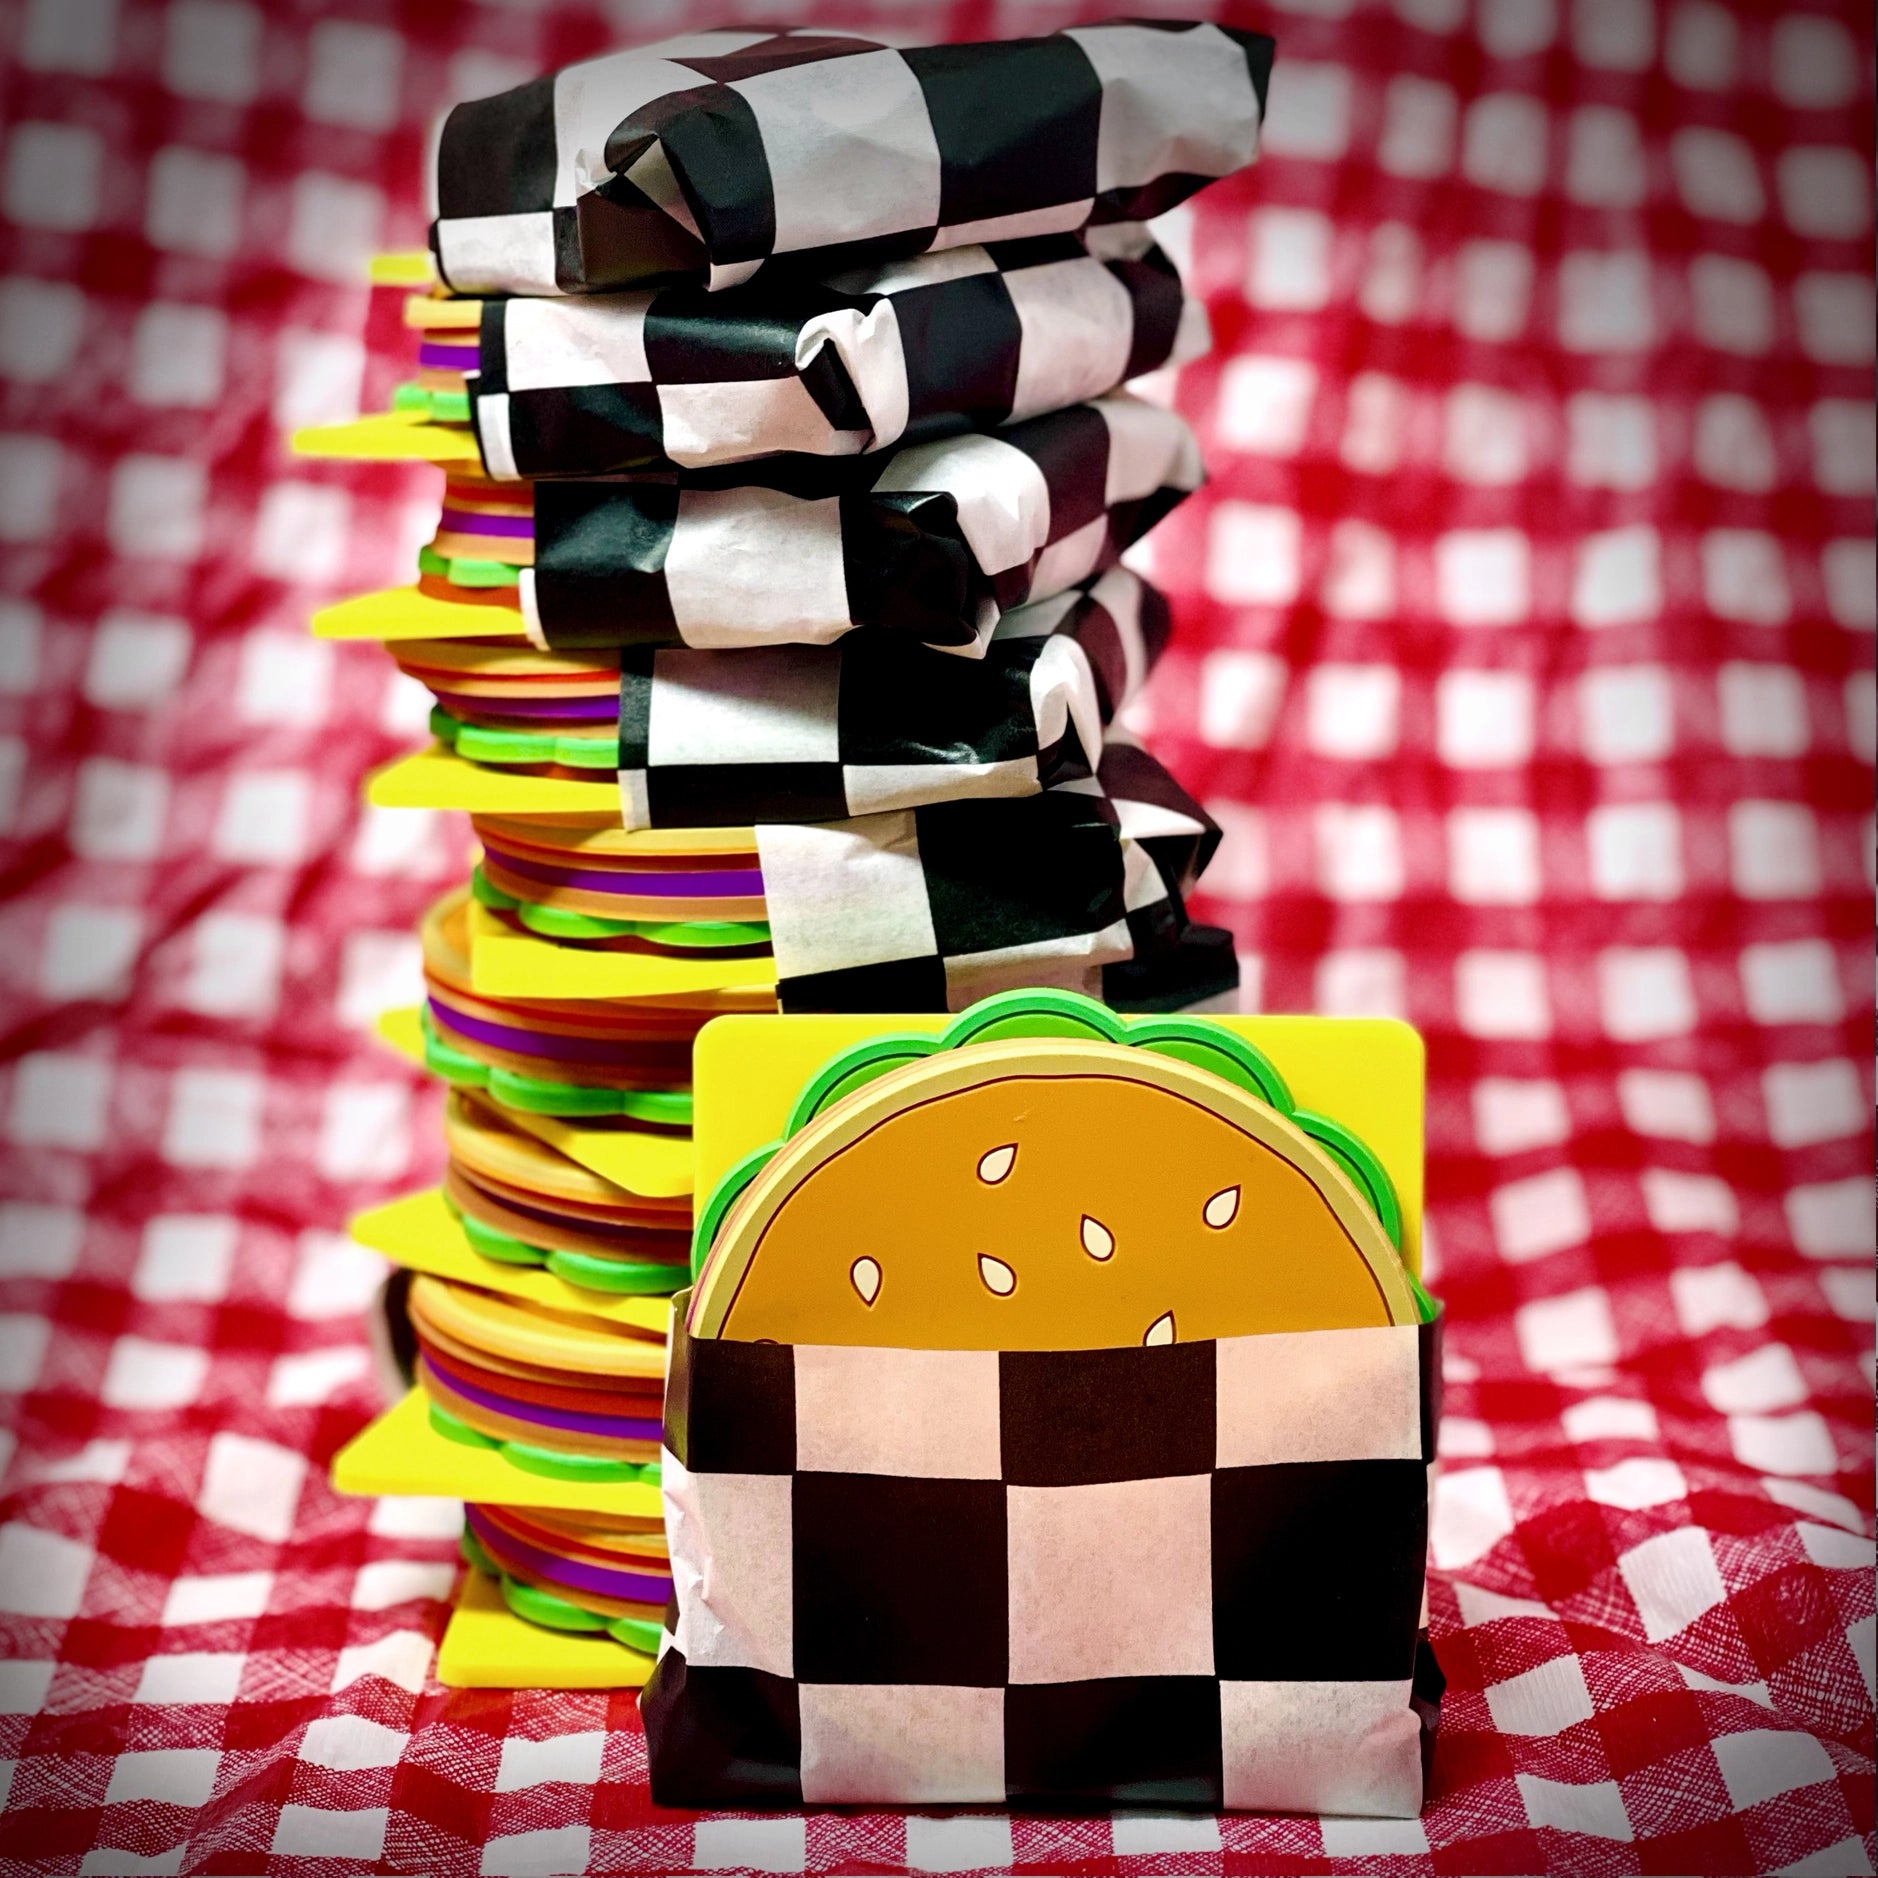 Cheeseburger coaster set in black and white grease paper.